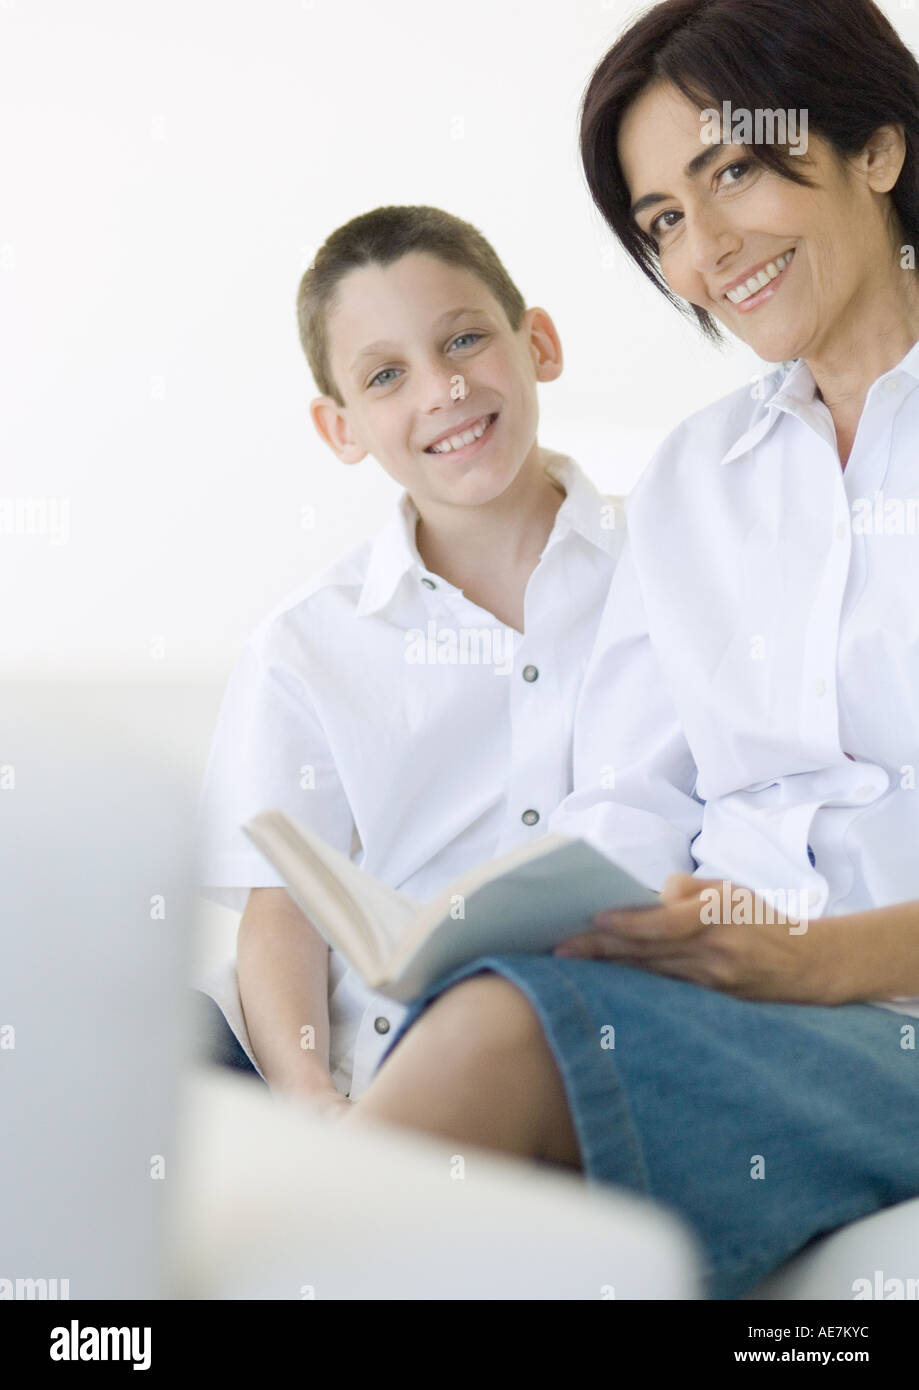 Boy and mature woman with book, smiling at camera Stock Photo